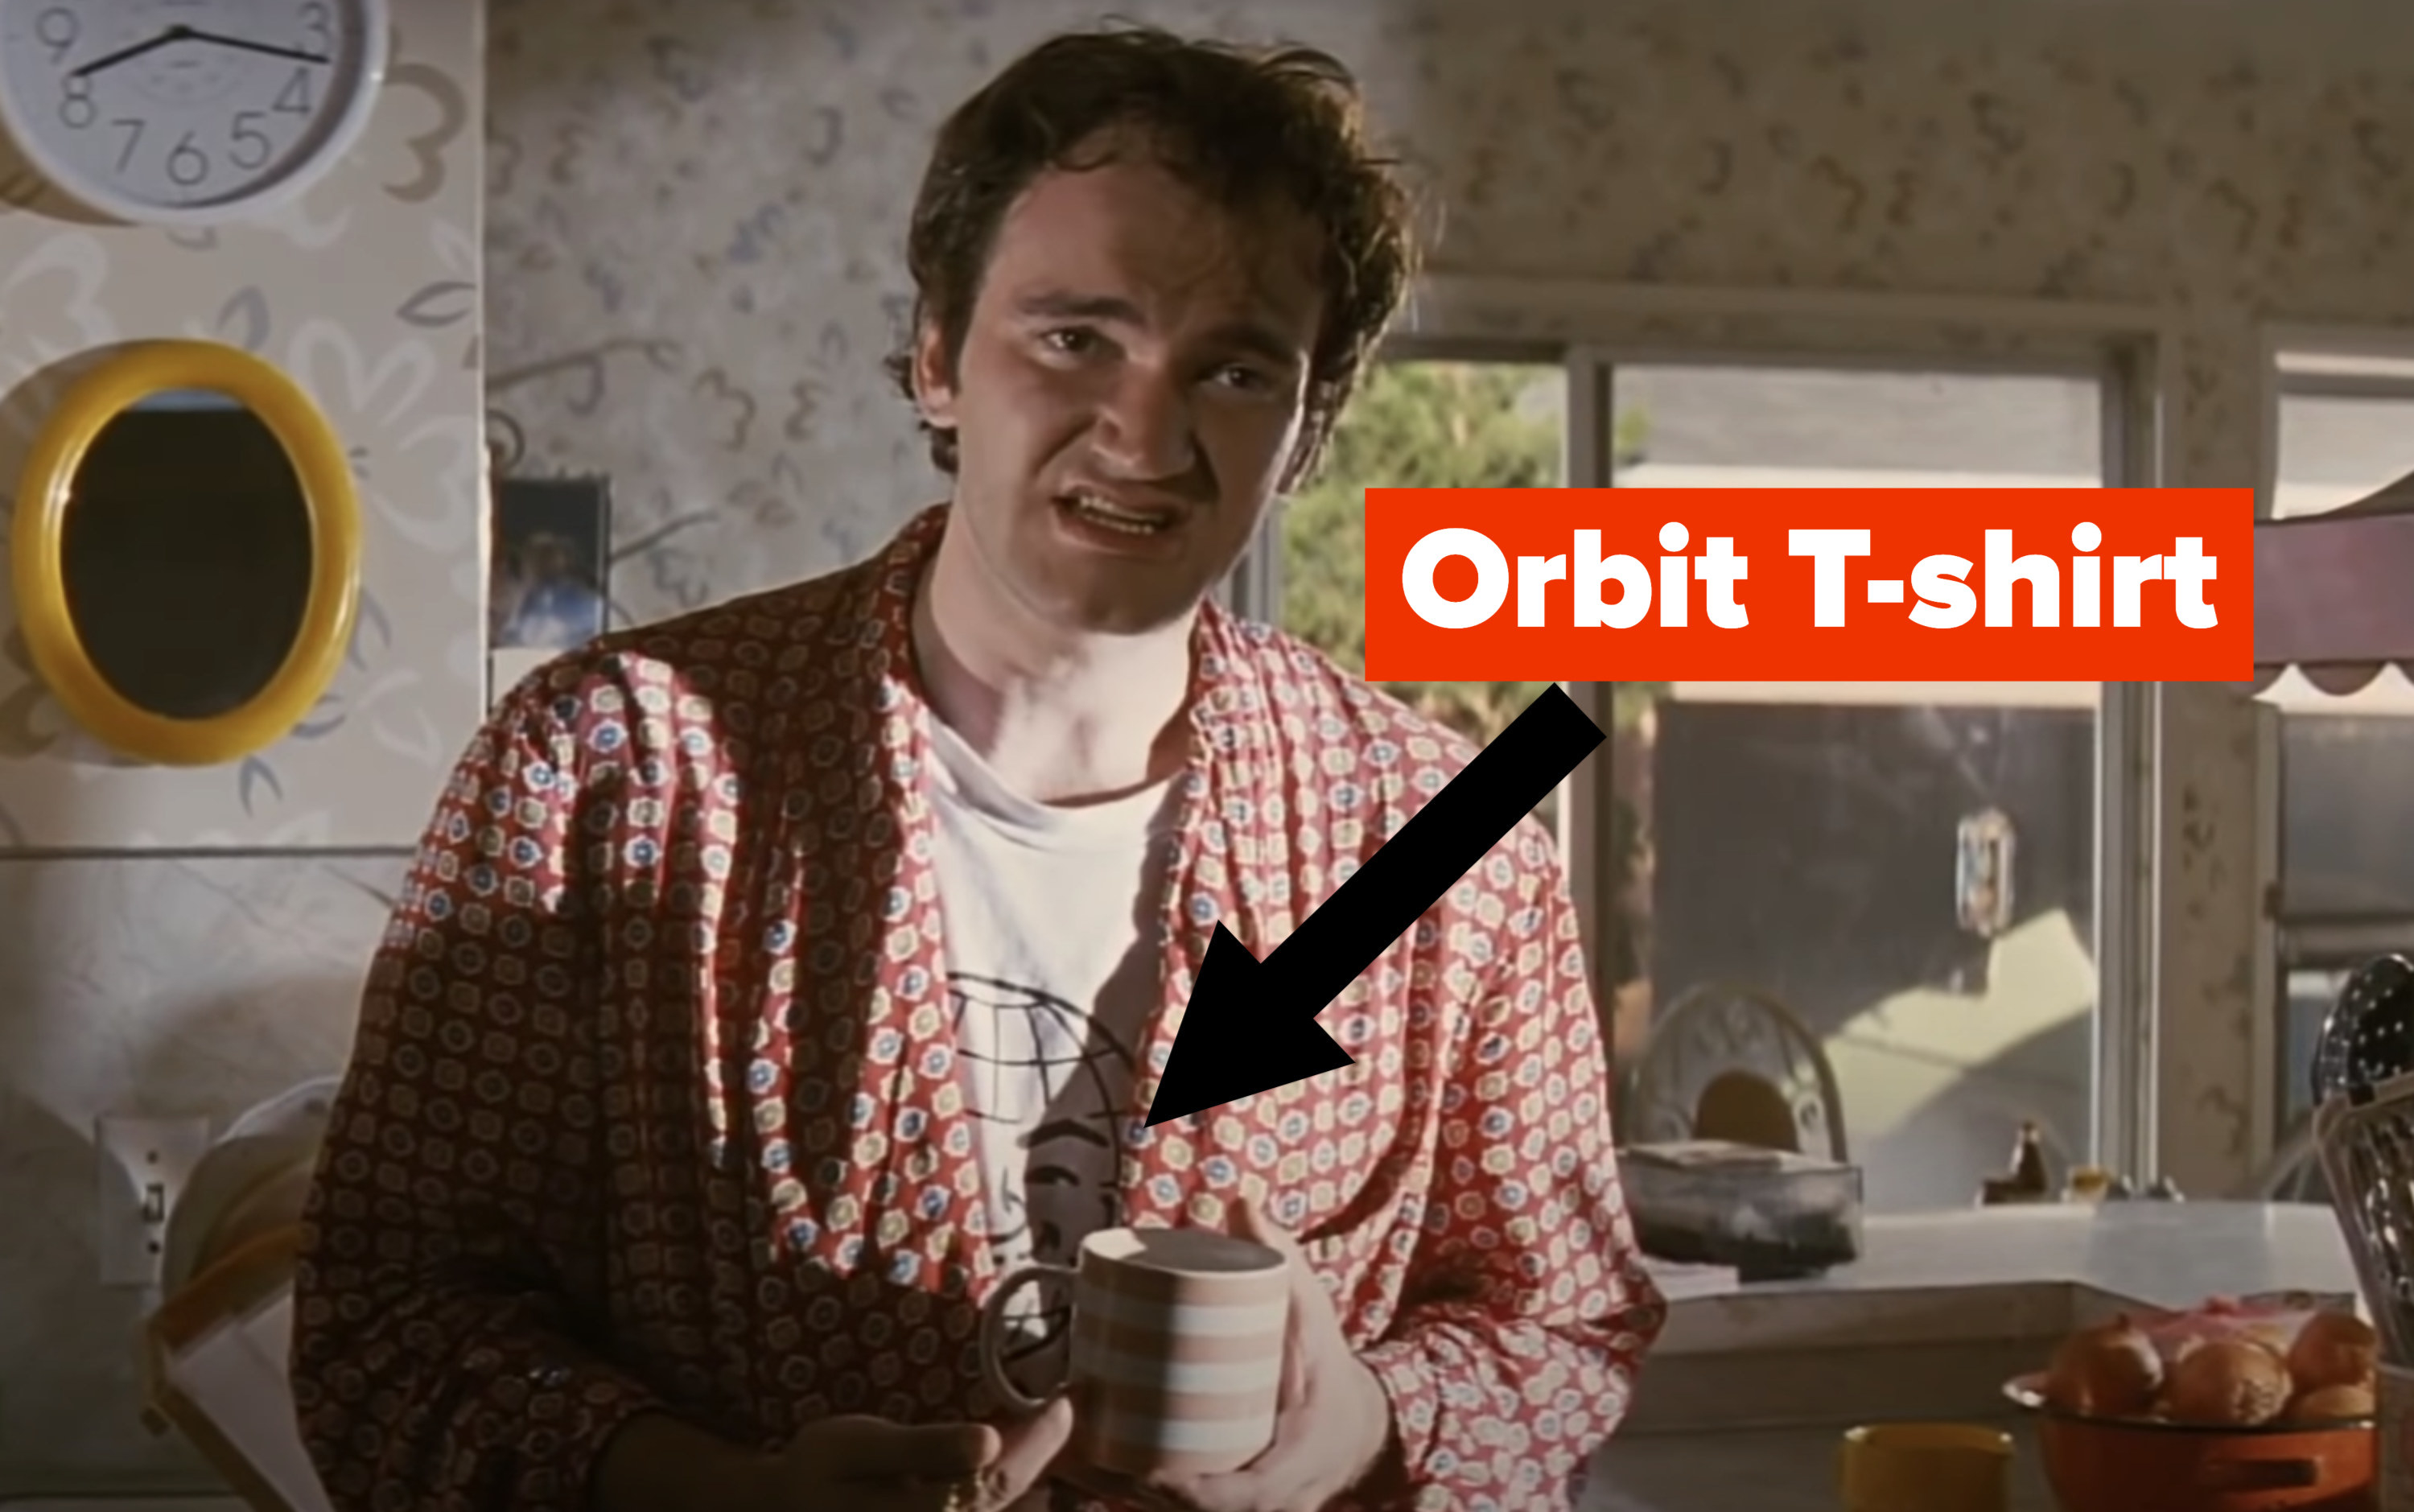 Tarantino in the film with an arrow pointing out his Orbit T-shirt